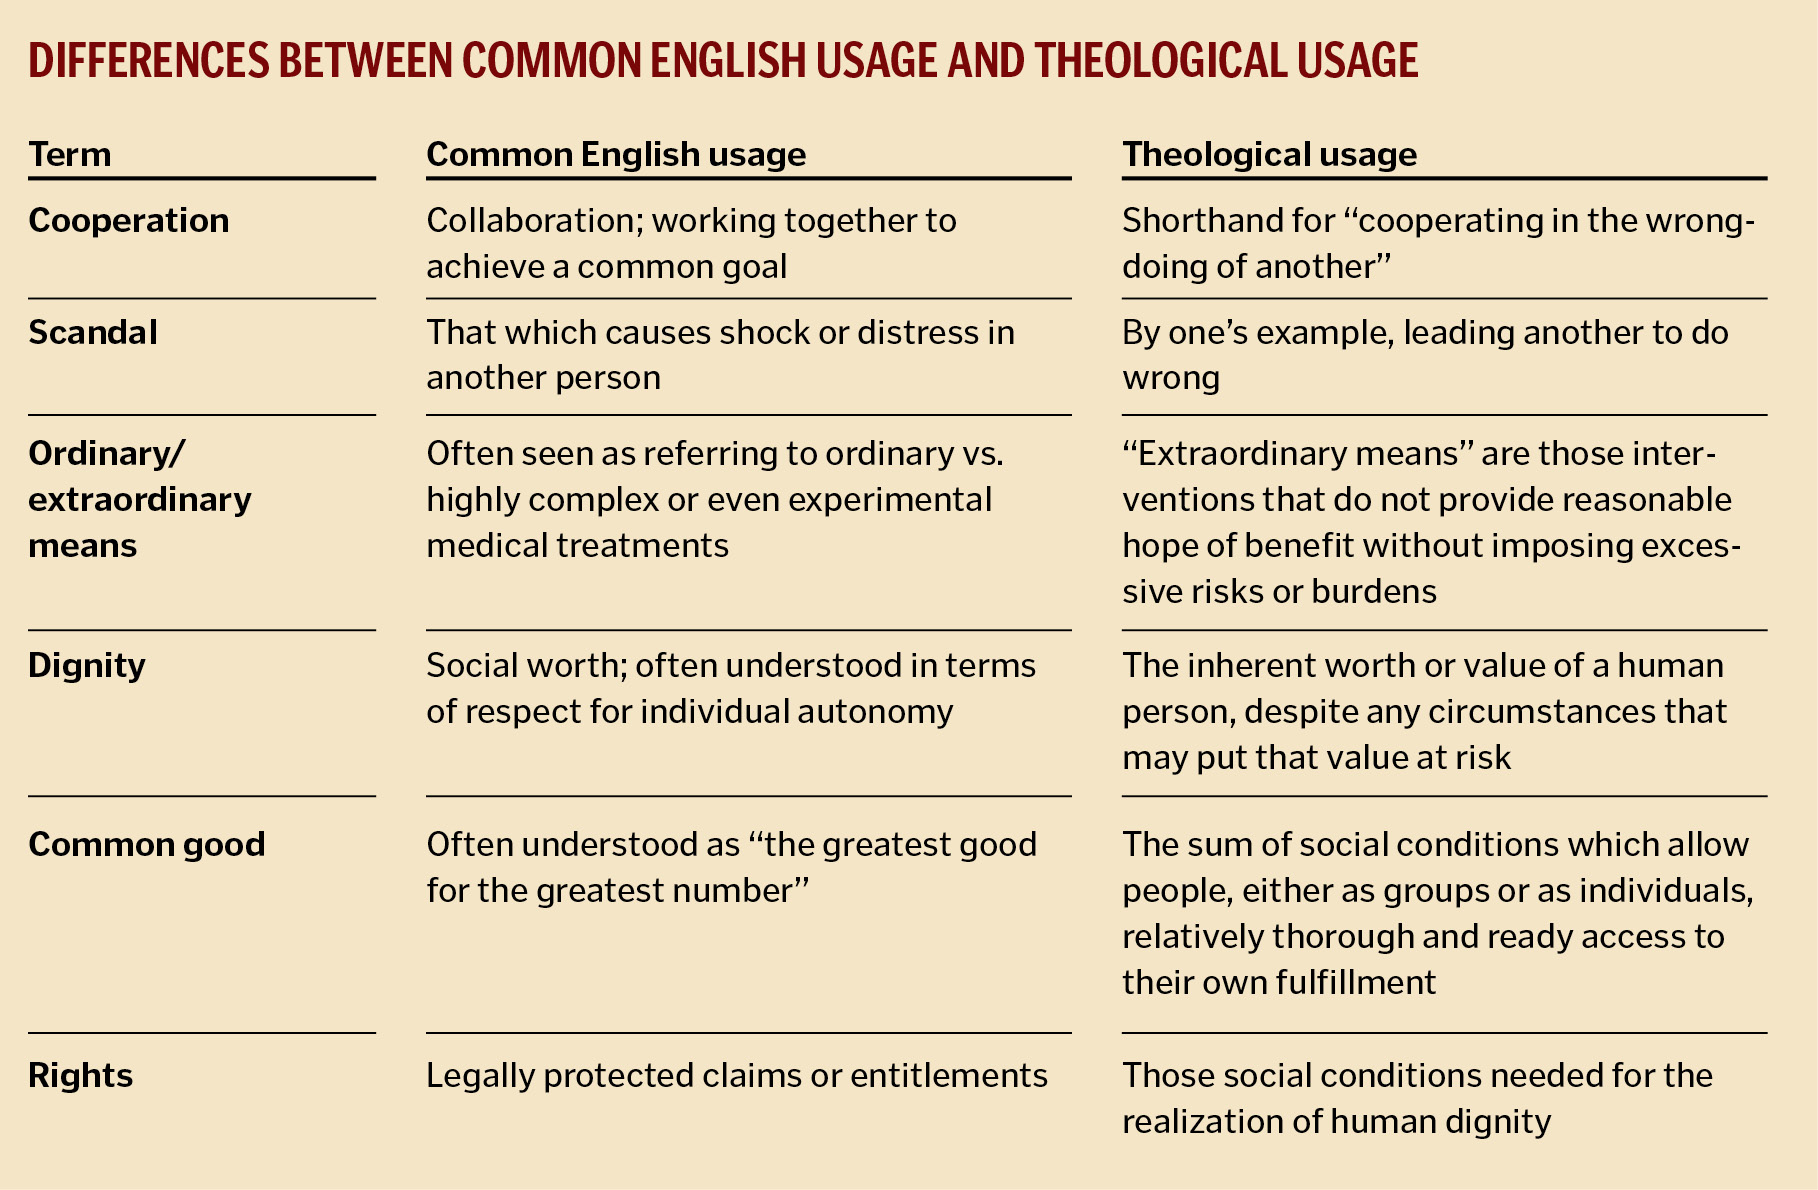 Differences Between Common English Usage and Theological Usage